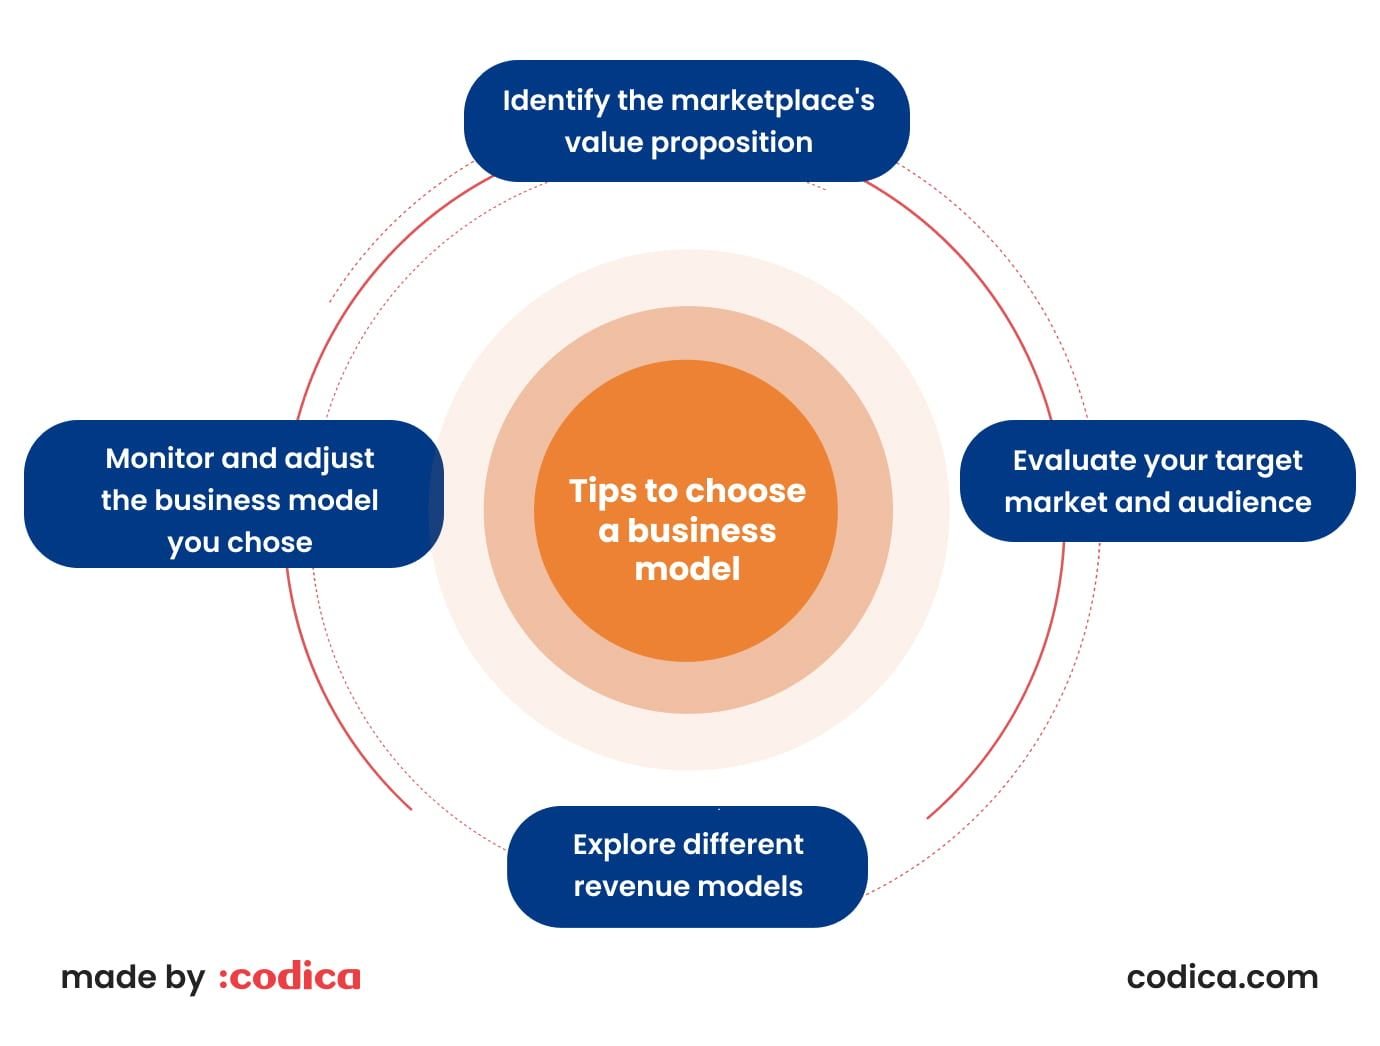 Key points to look at when choosing a business model